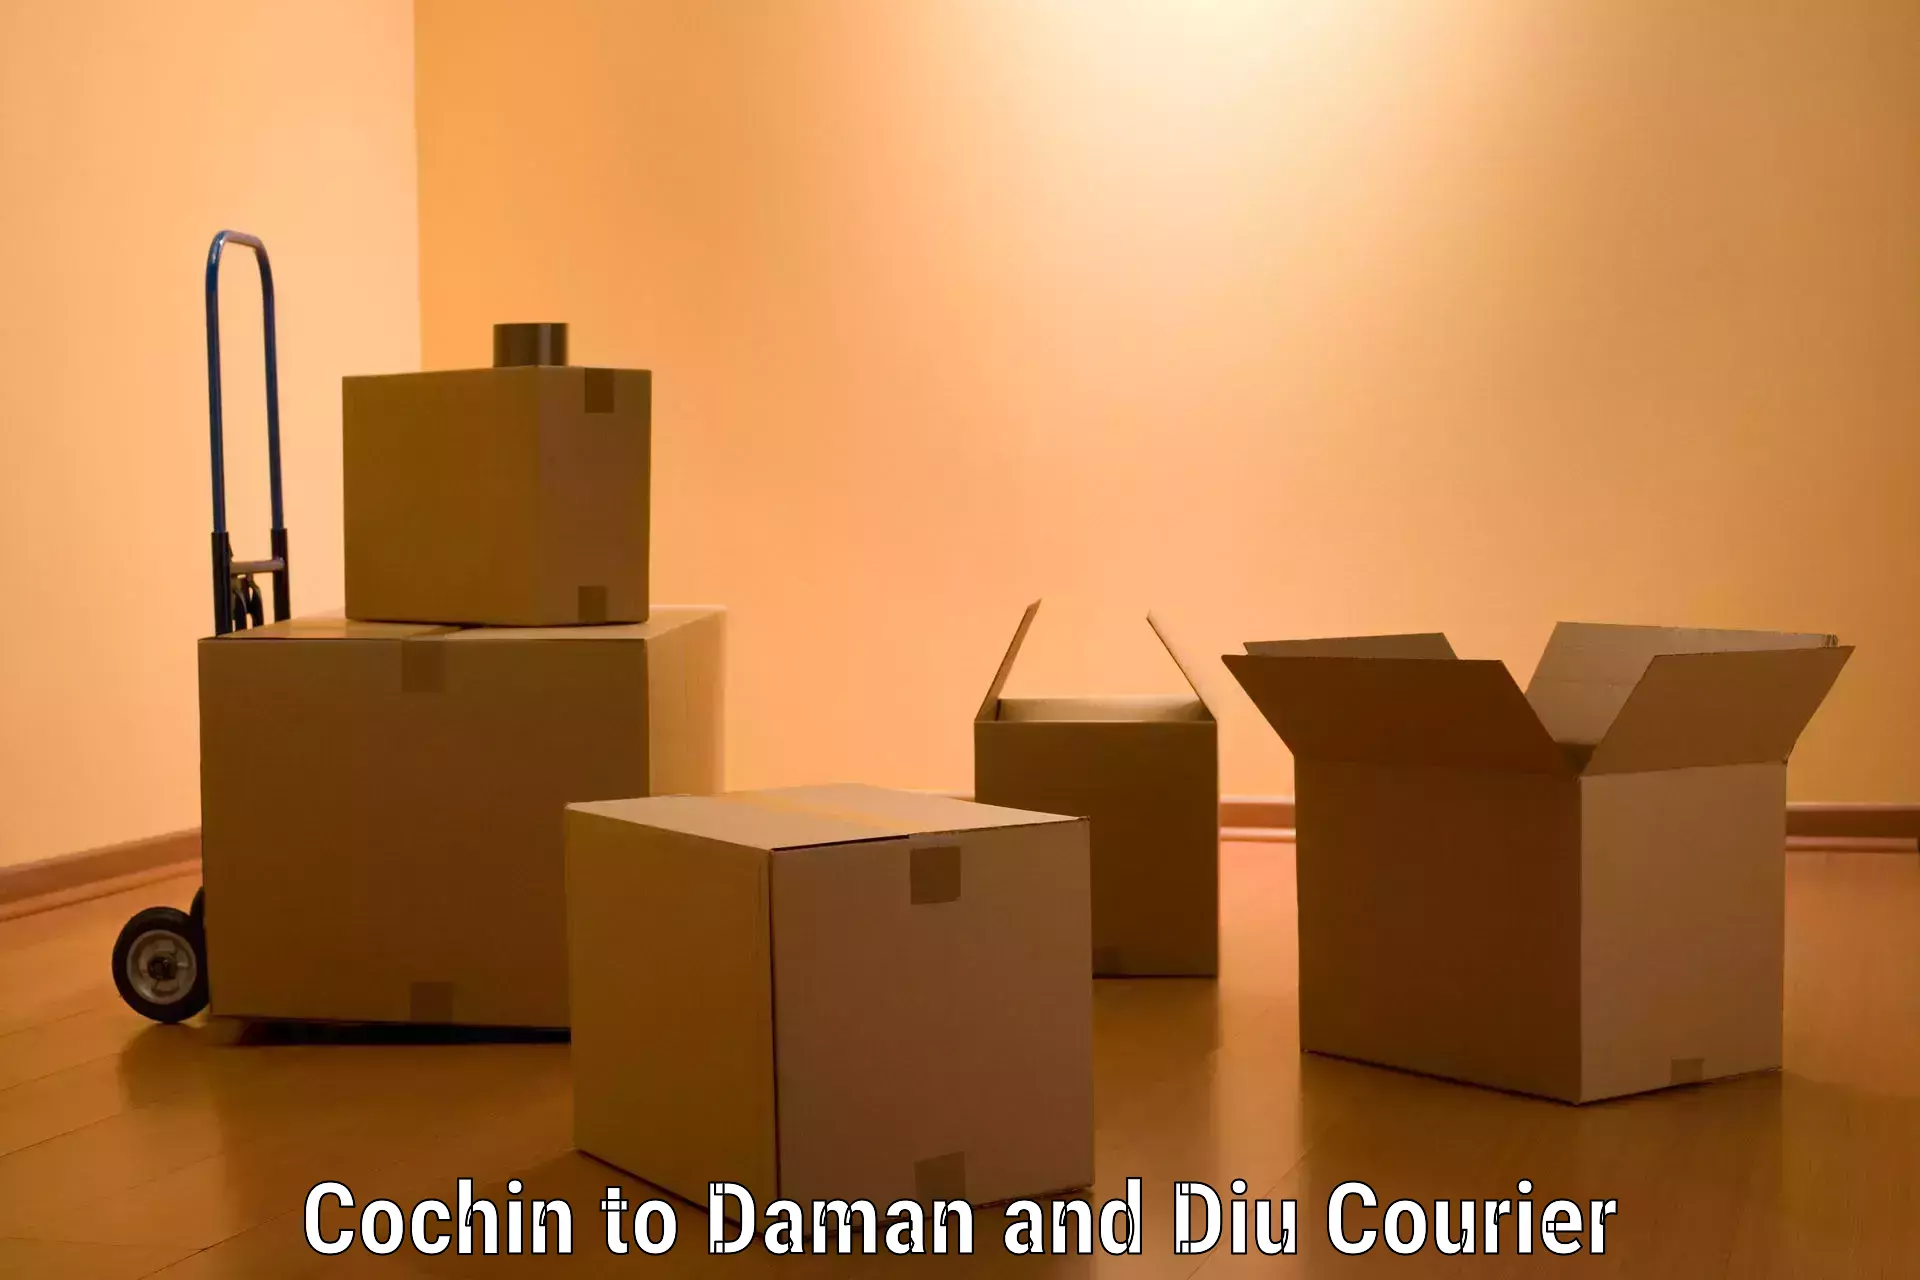 Furniture delivery service Cochin to Daman and Diu